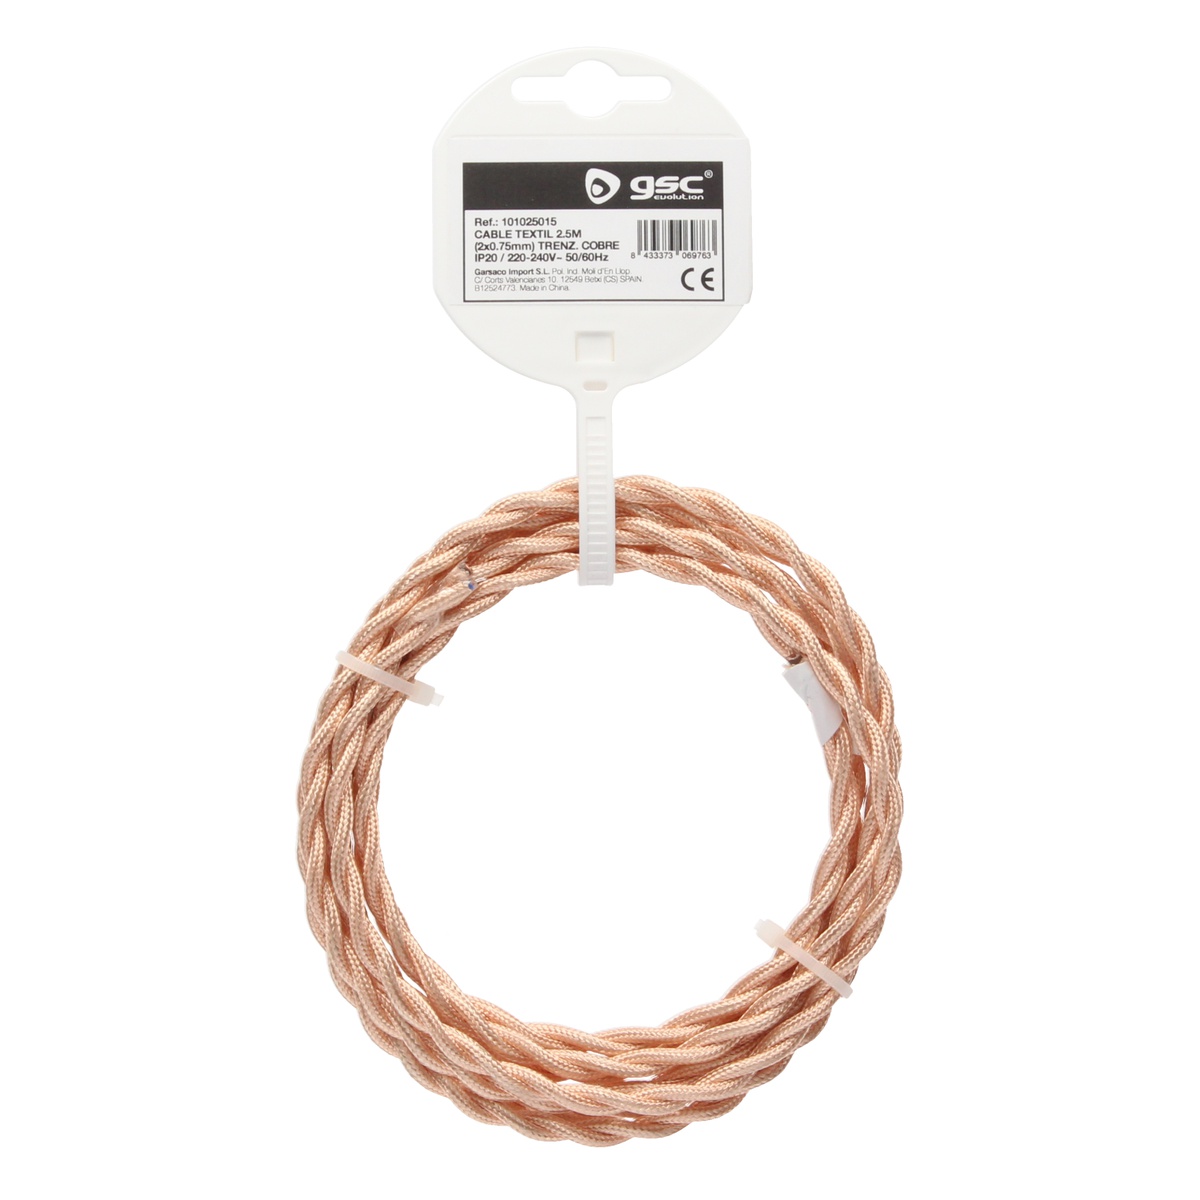 2.5m textile cable (2x0.75mm) Copper braided